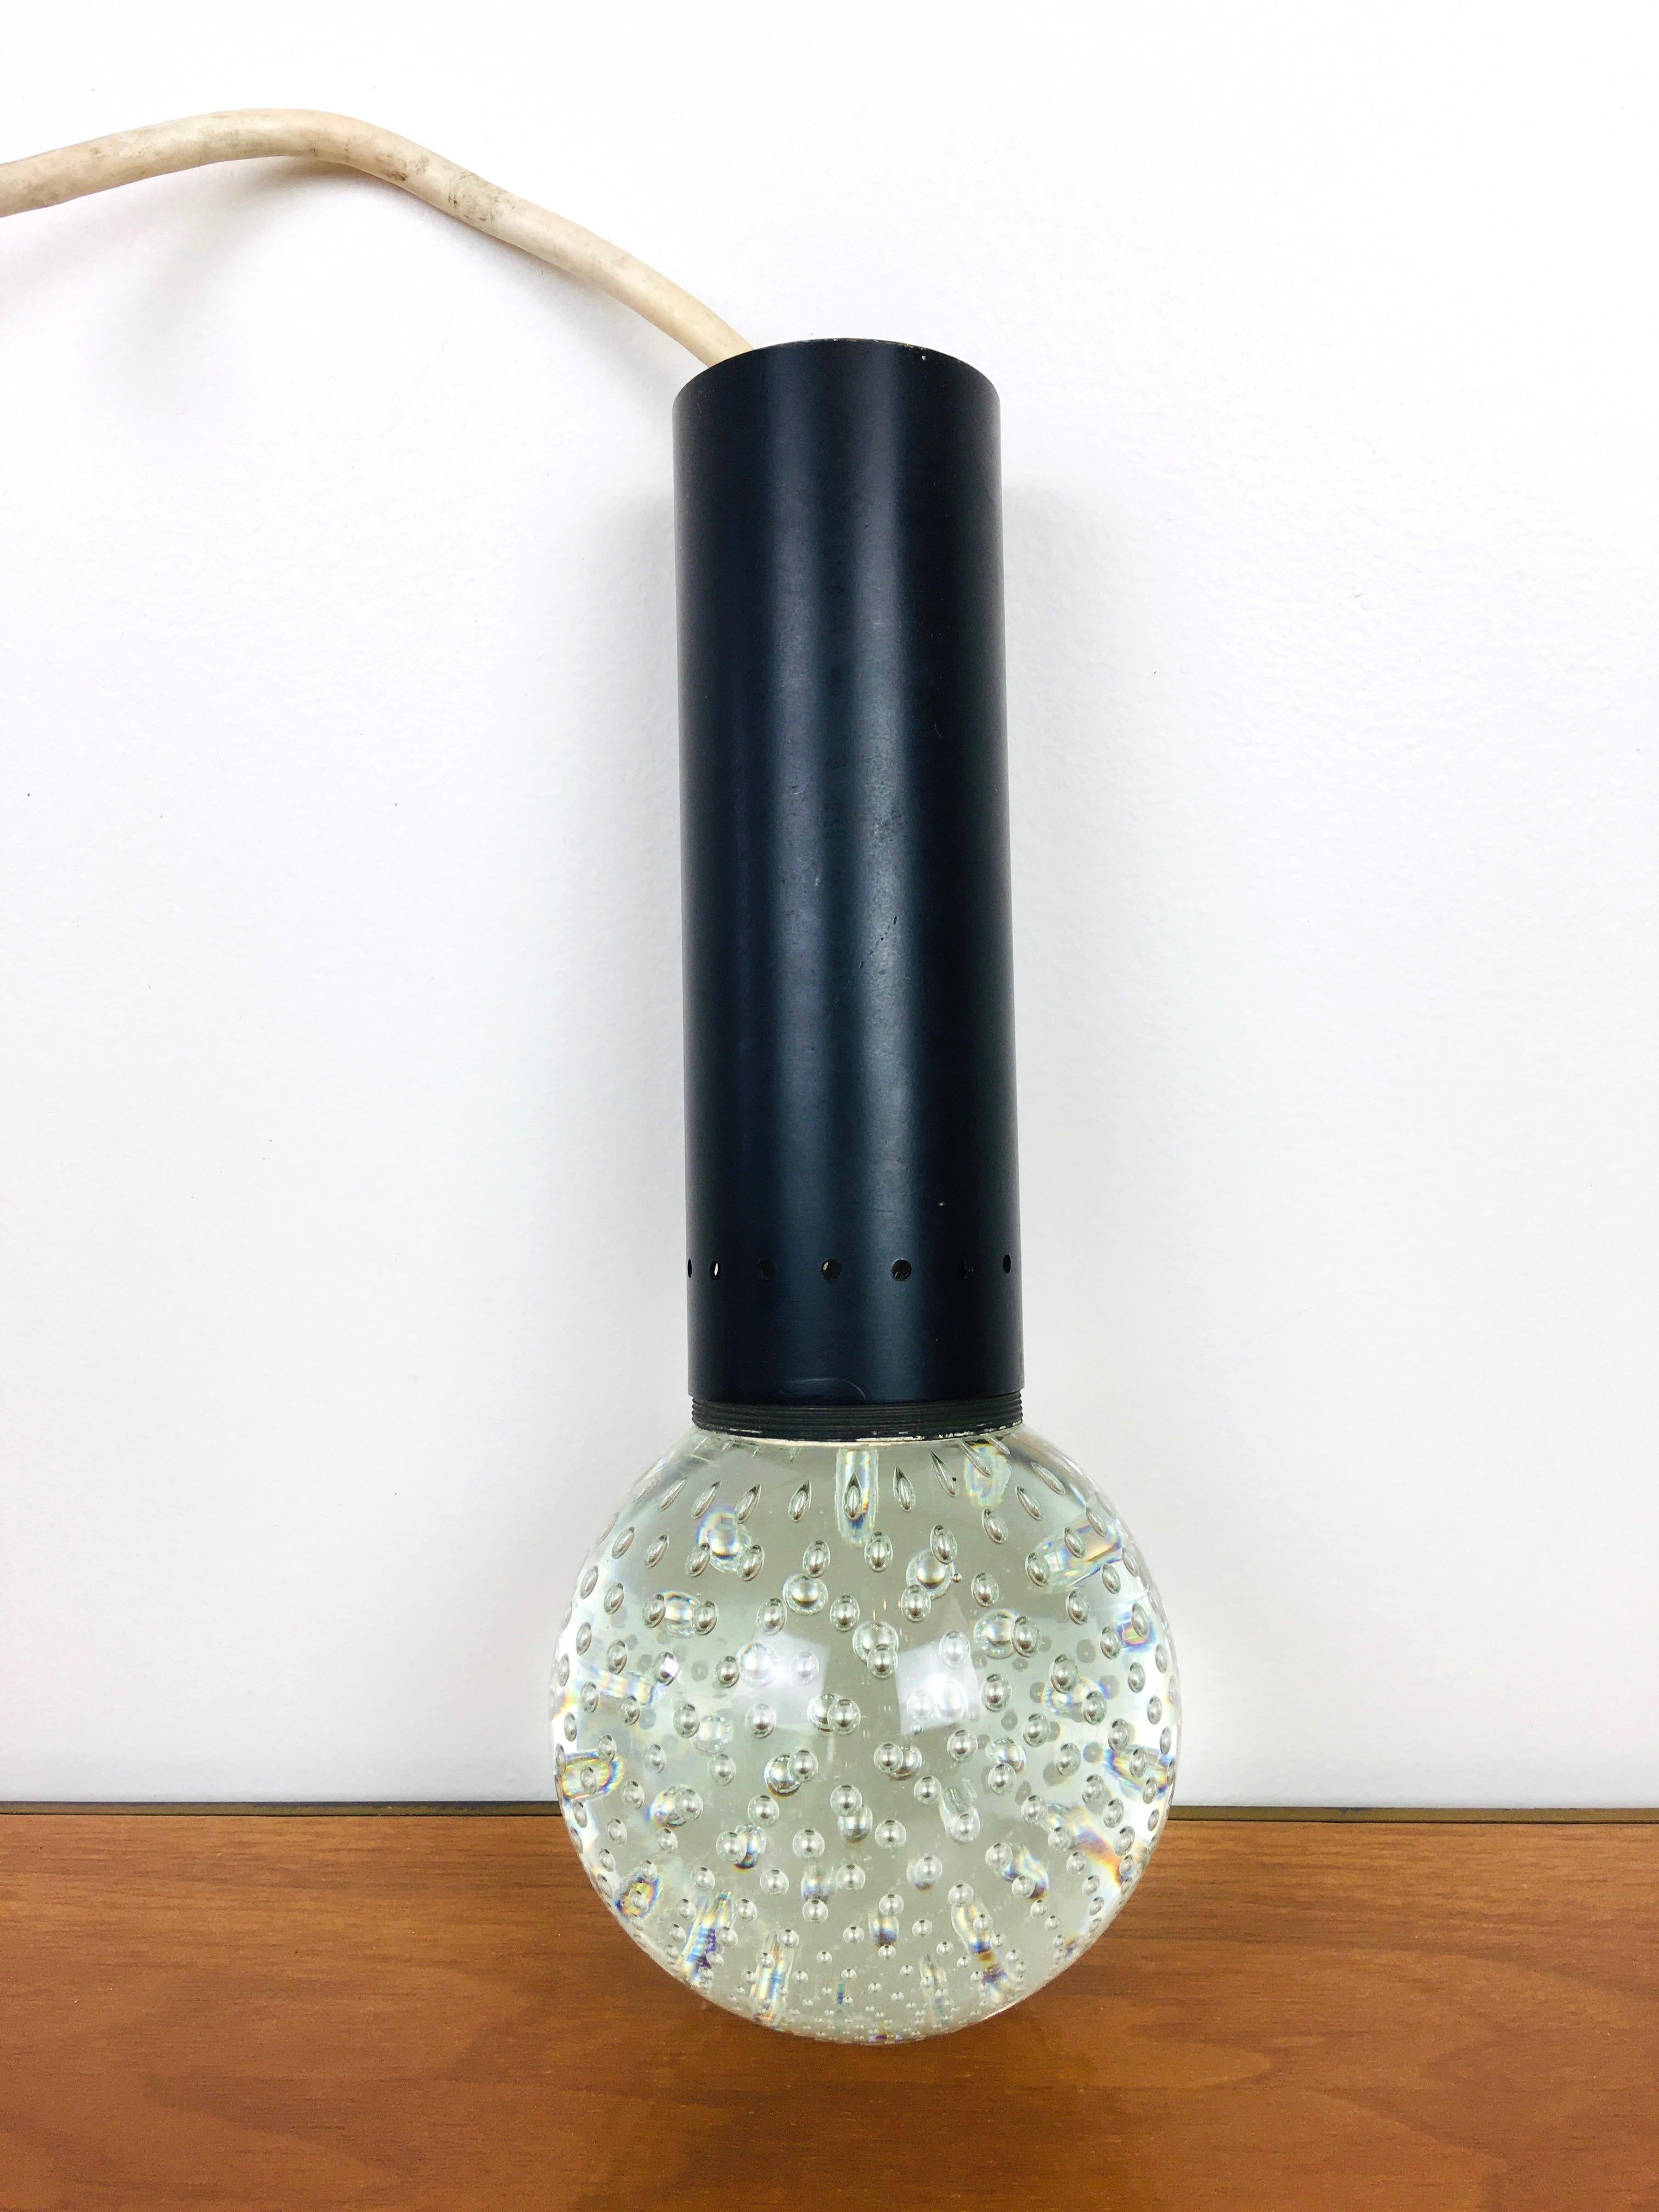 Mid-century pendant light by Gino Sarfatti & Seguso.
Glass ball with controlled bubbles, Made in Italy.
Glass ball measures 4